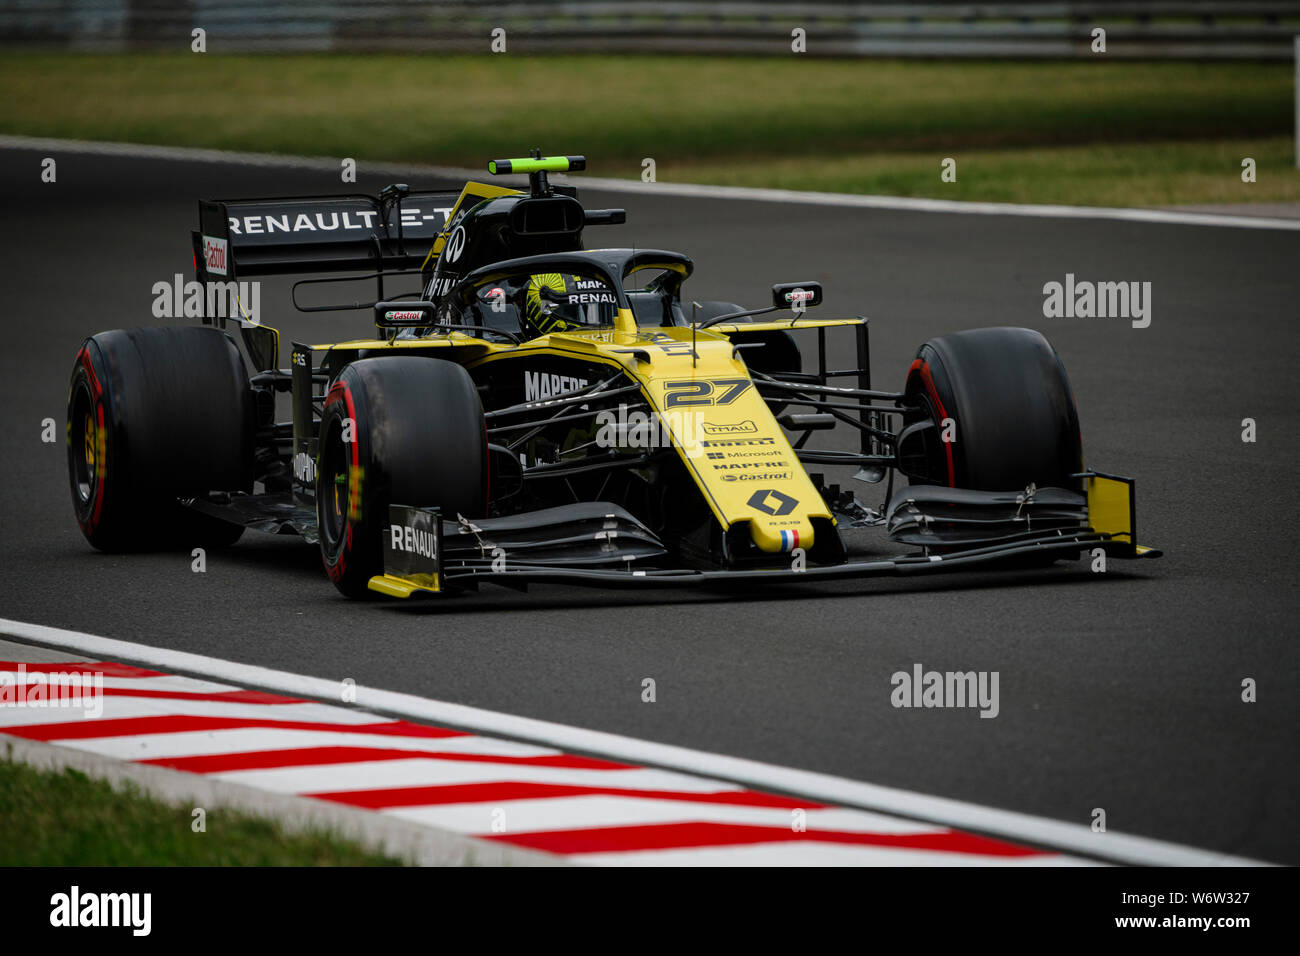 Renault Sport F1 Team’s German driver Nico Hulkenberg competes during the first practice session of the Hungarian F1 Grand Prix. Stock Photo